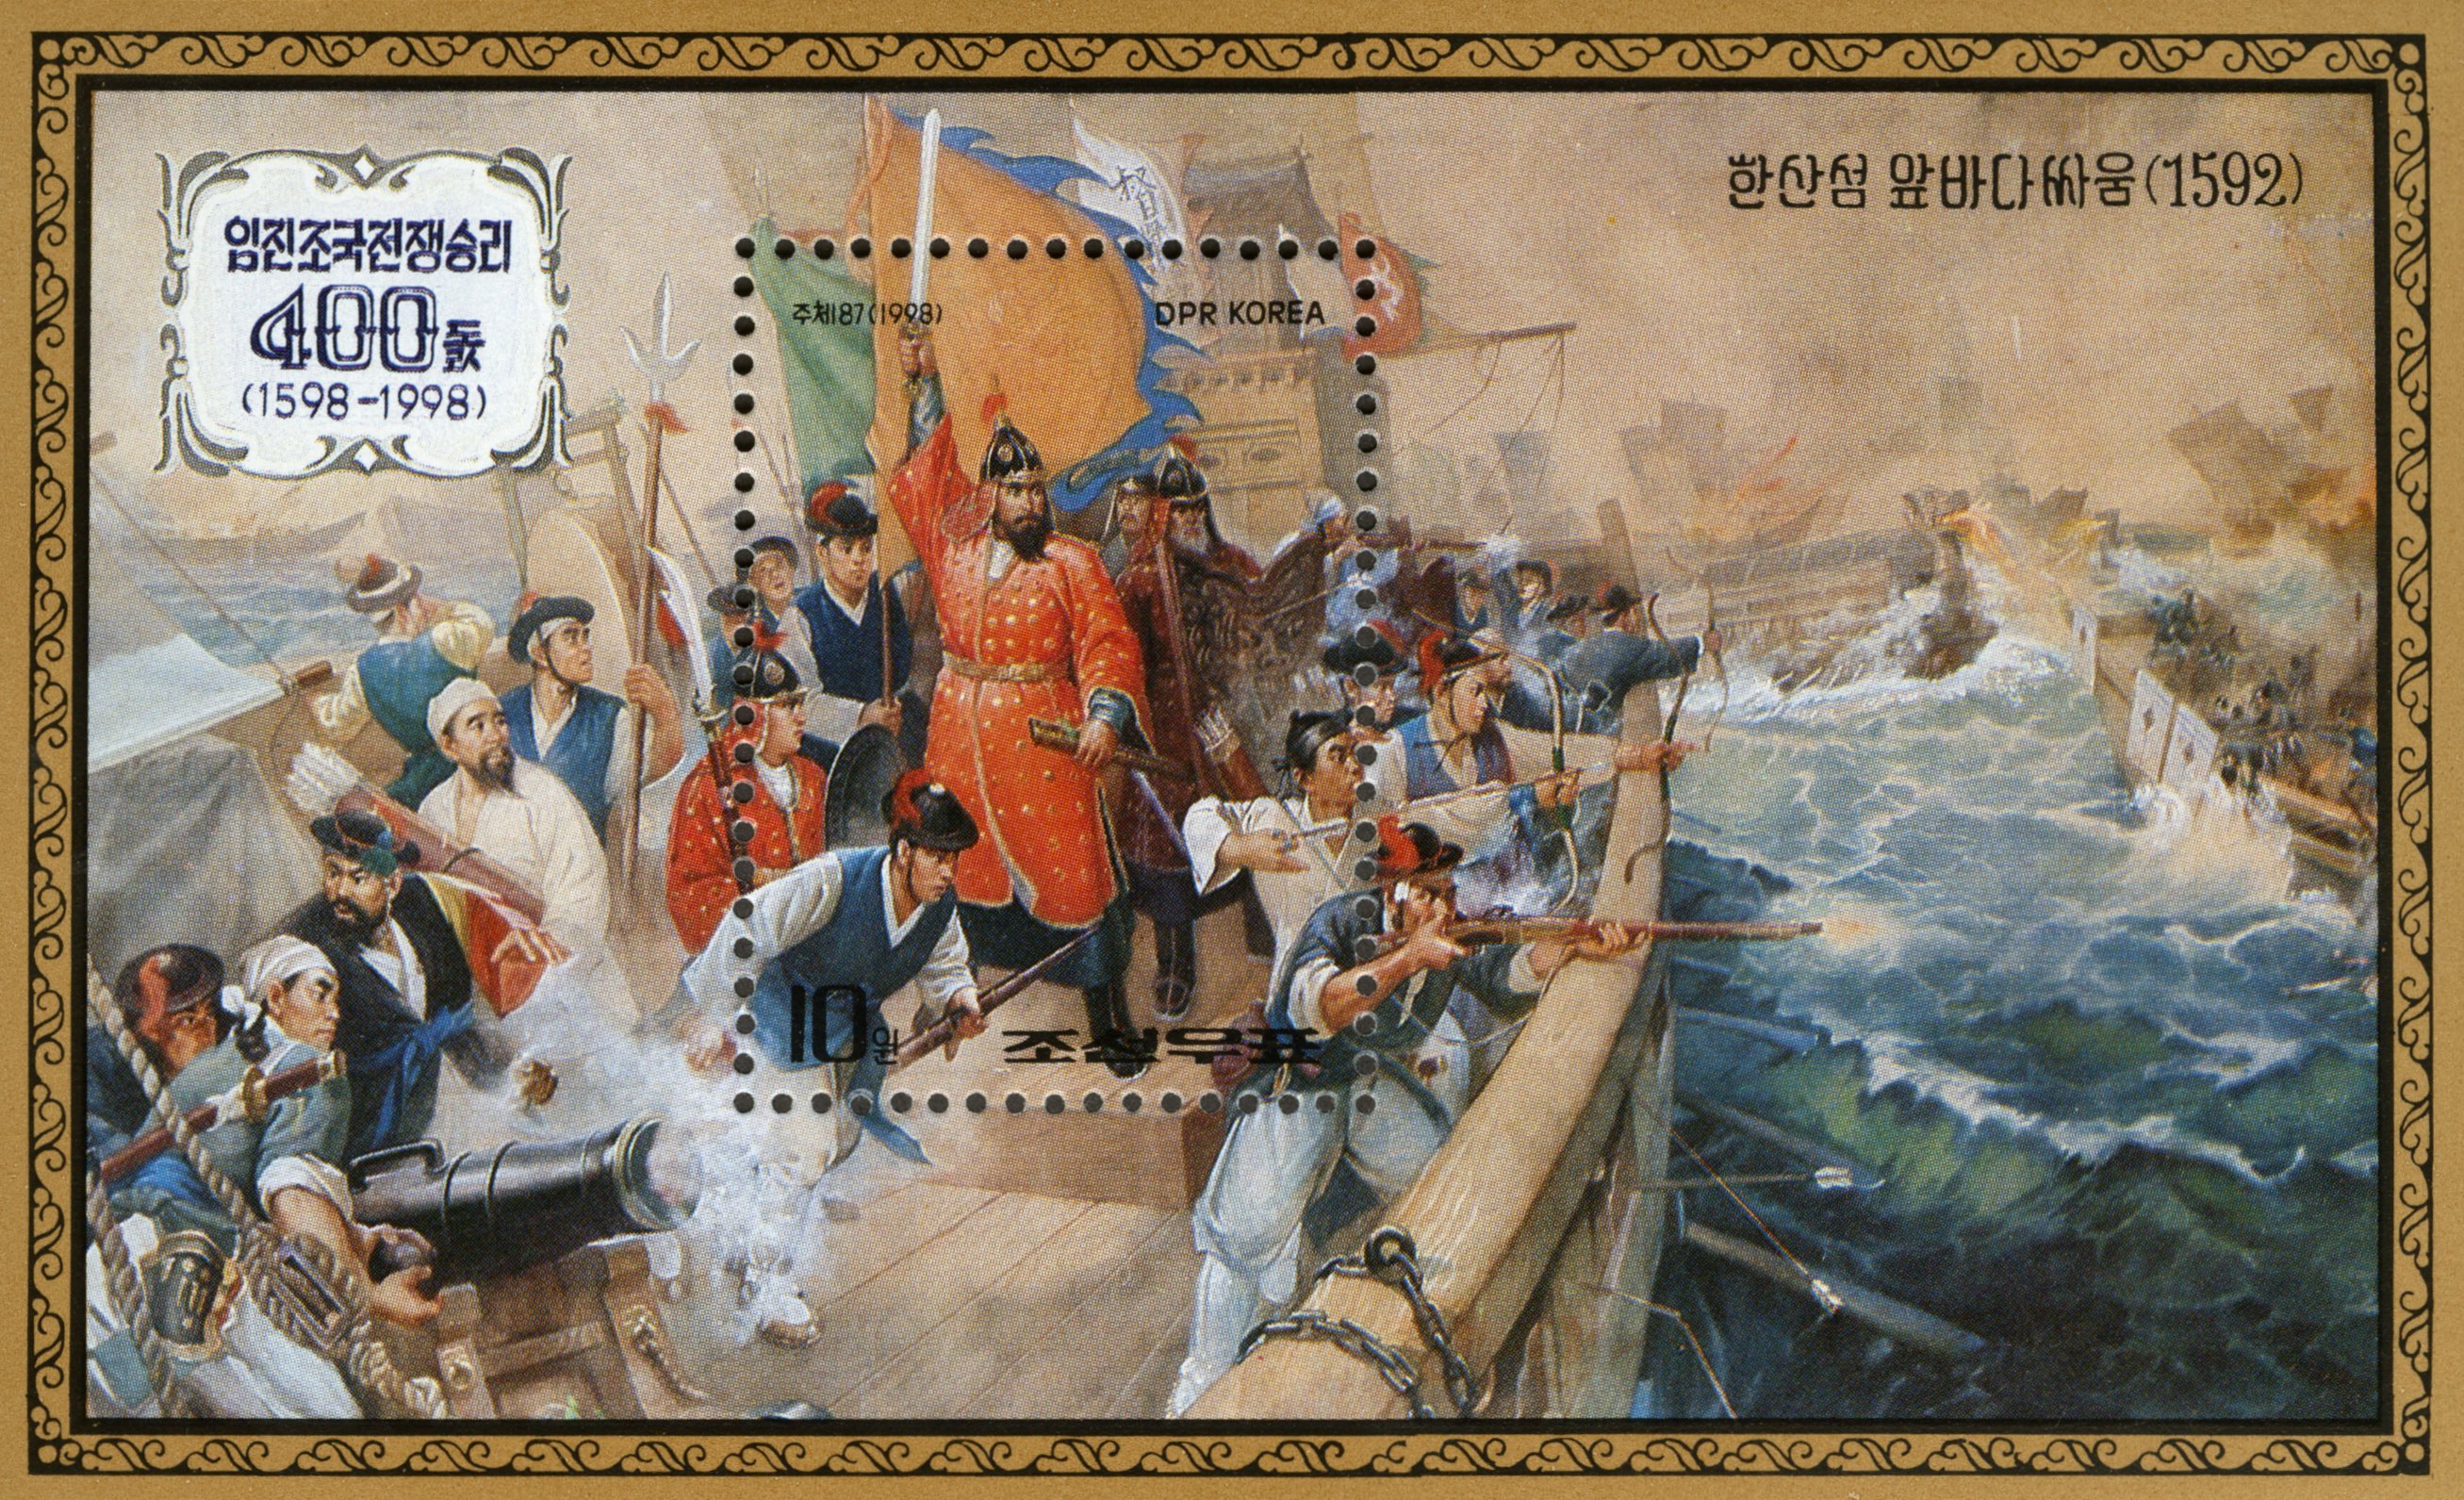 Sailors on a boat in stormy seas point guns at an opposing vessel, while in the center of the ship the commander in bright red robes holds up a sword.